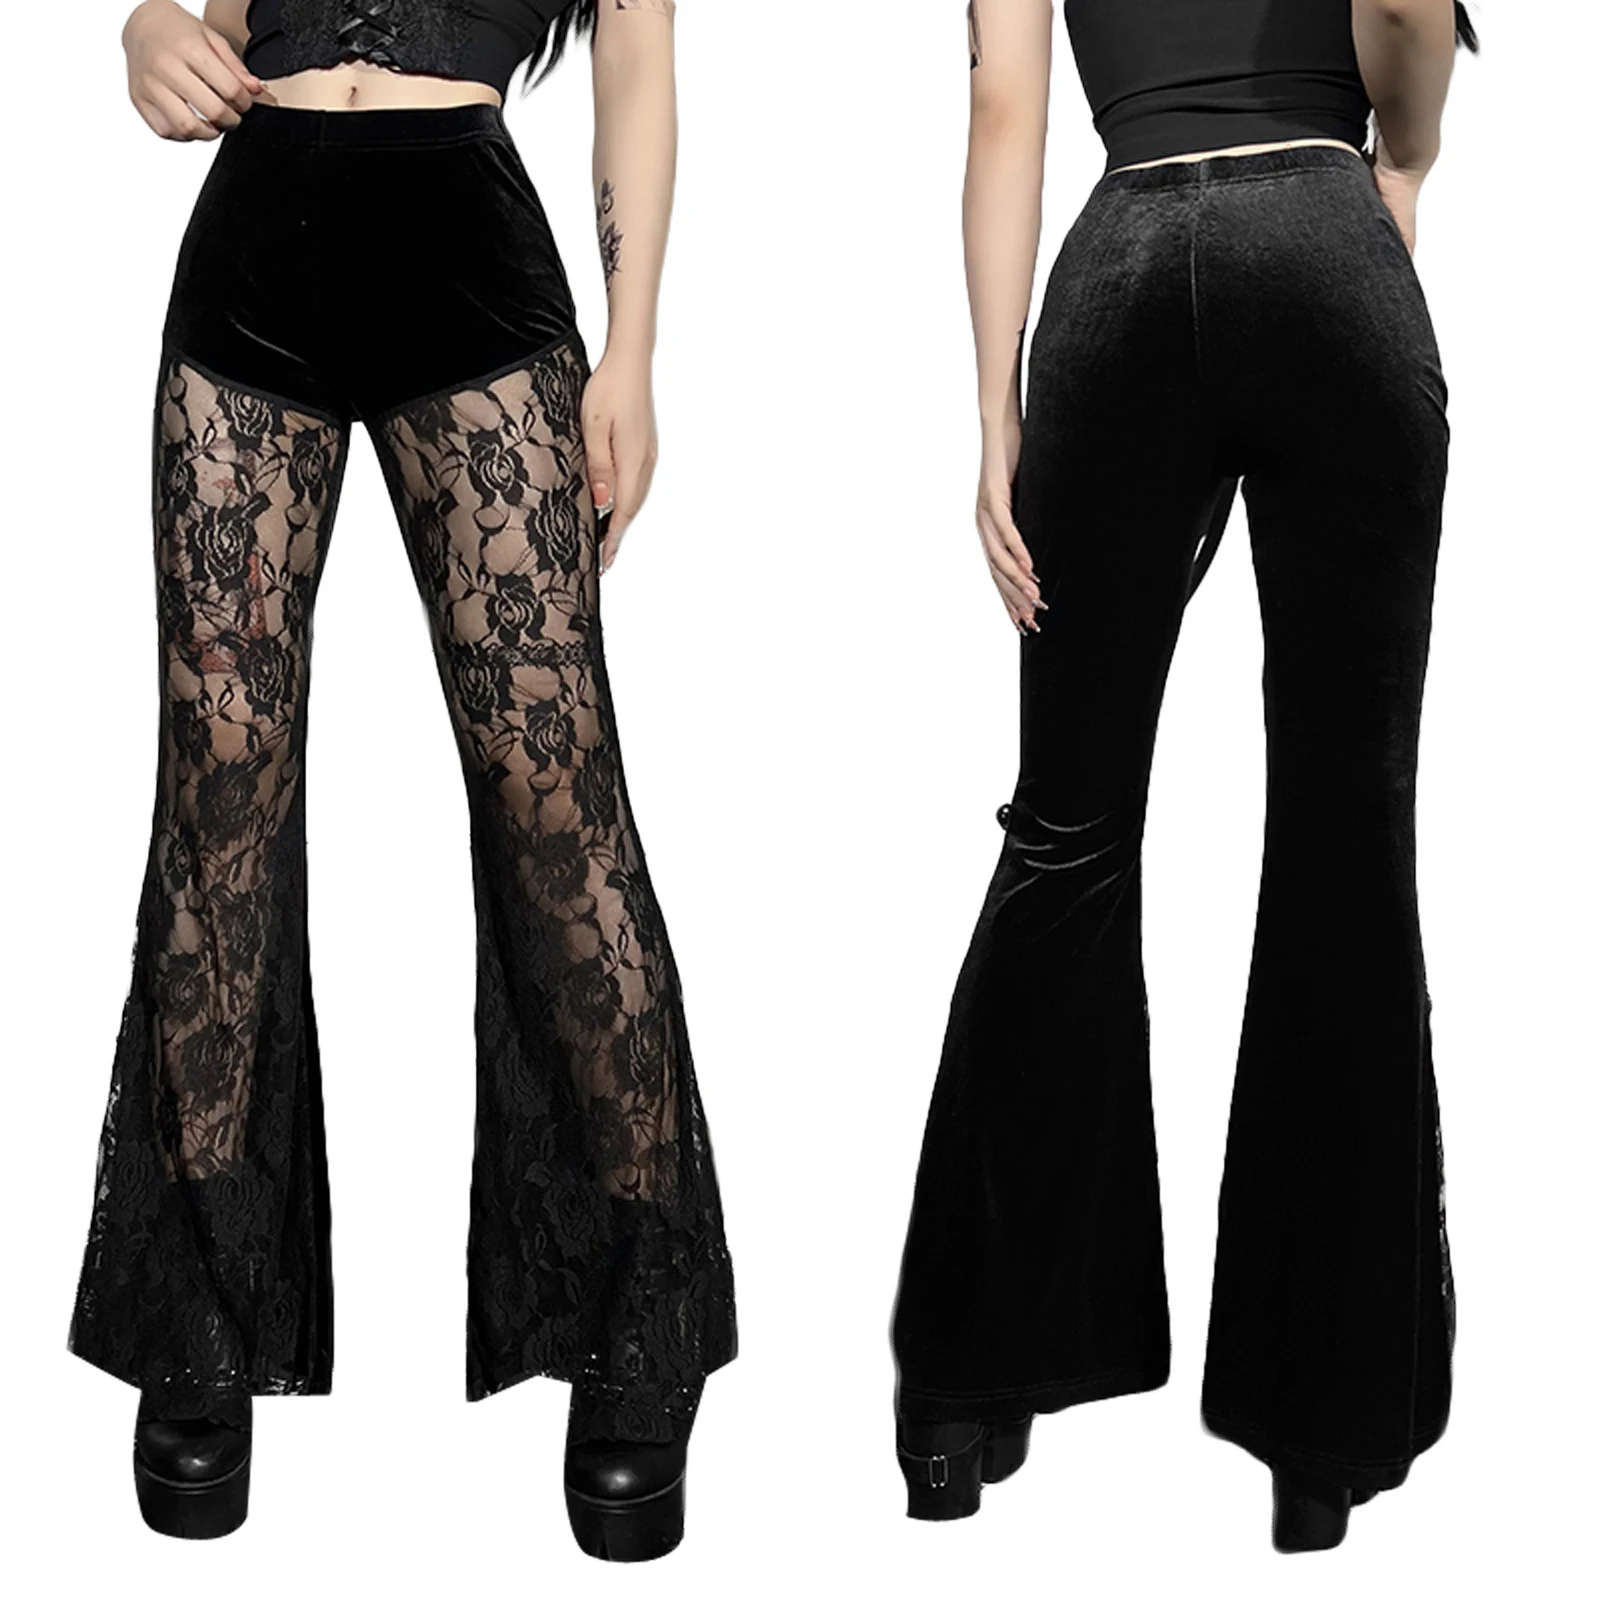 

Women Flared Pants with Lace Stitching Perspective High Waist Solid Color Summer Clothing